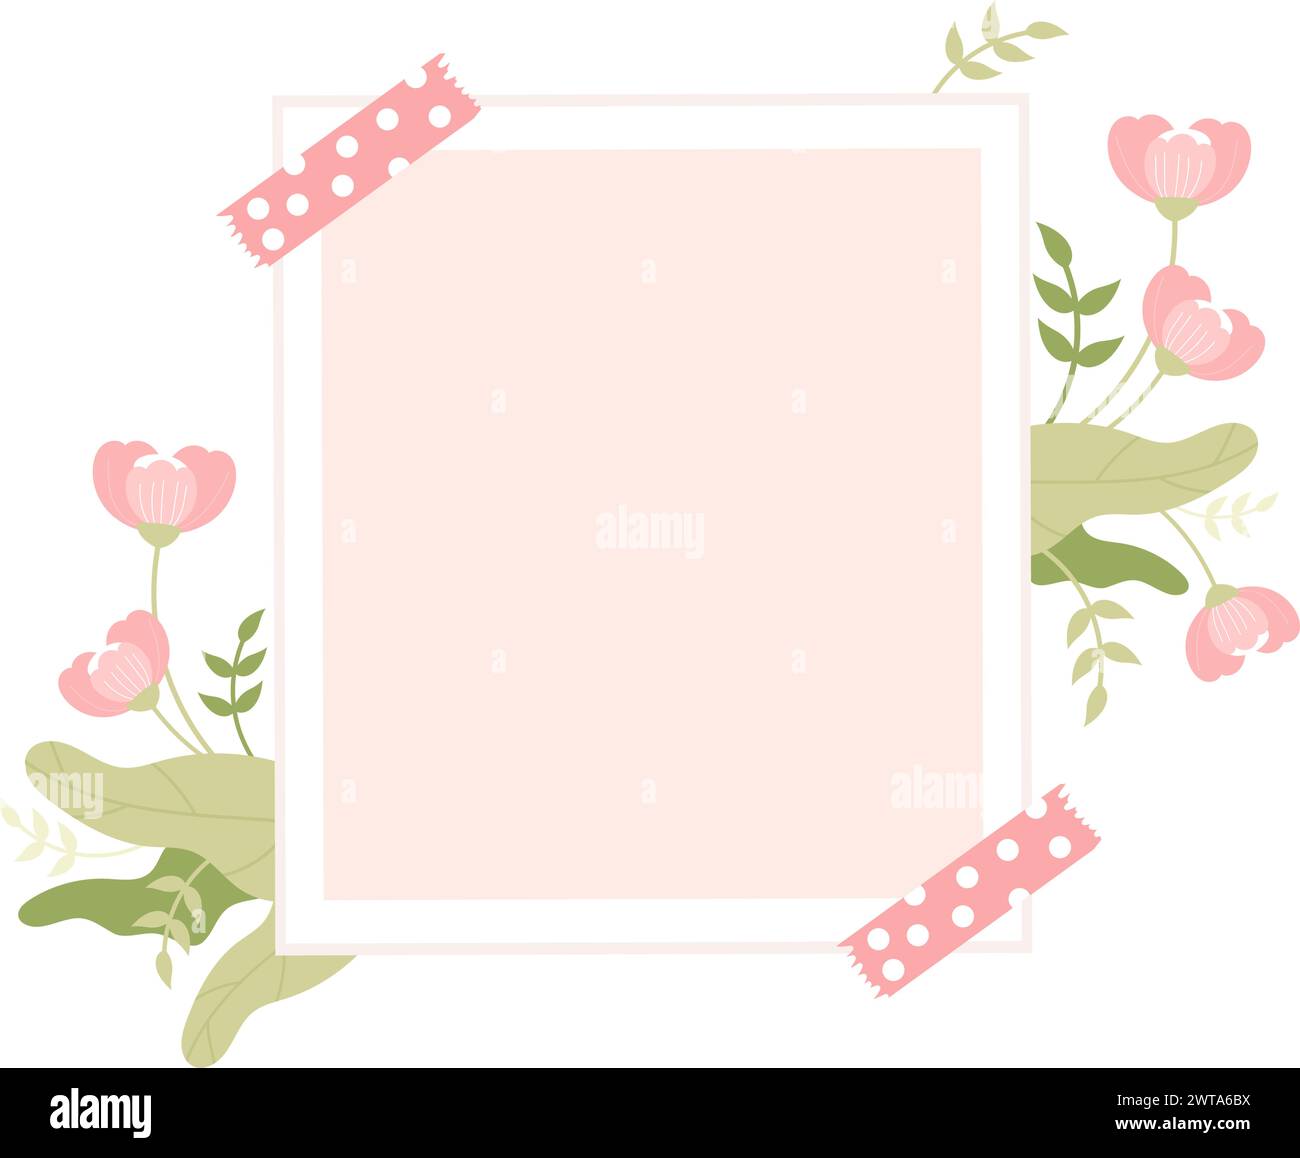 Photo frame with empty space with soft pink flowers and leaves. Vector illustration template in flat style for holiday design. Stock Vector